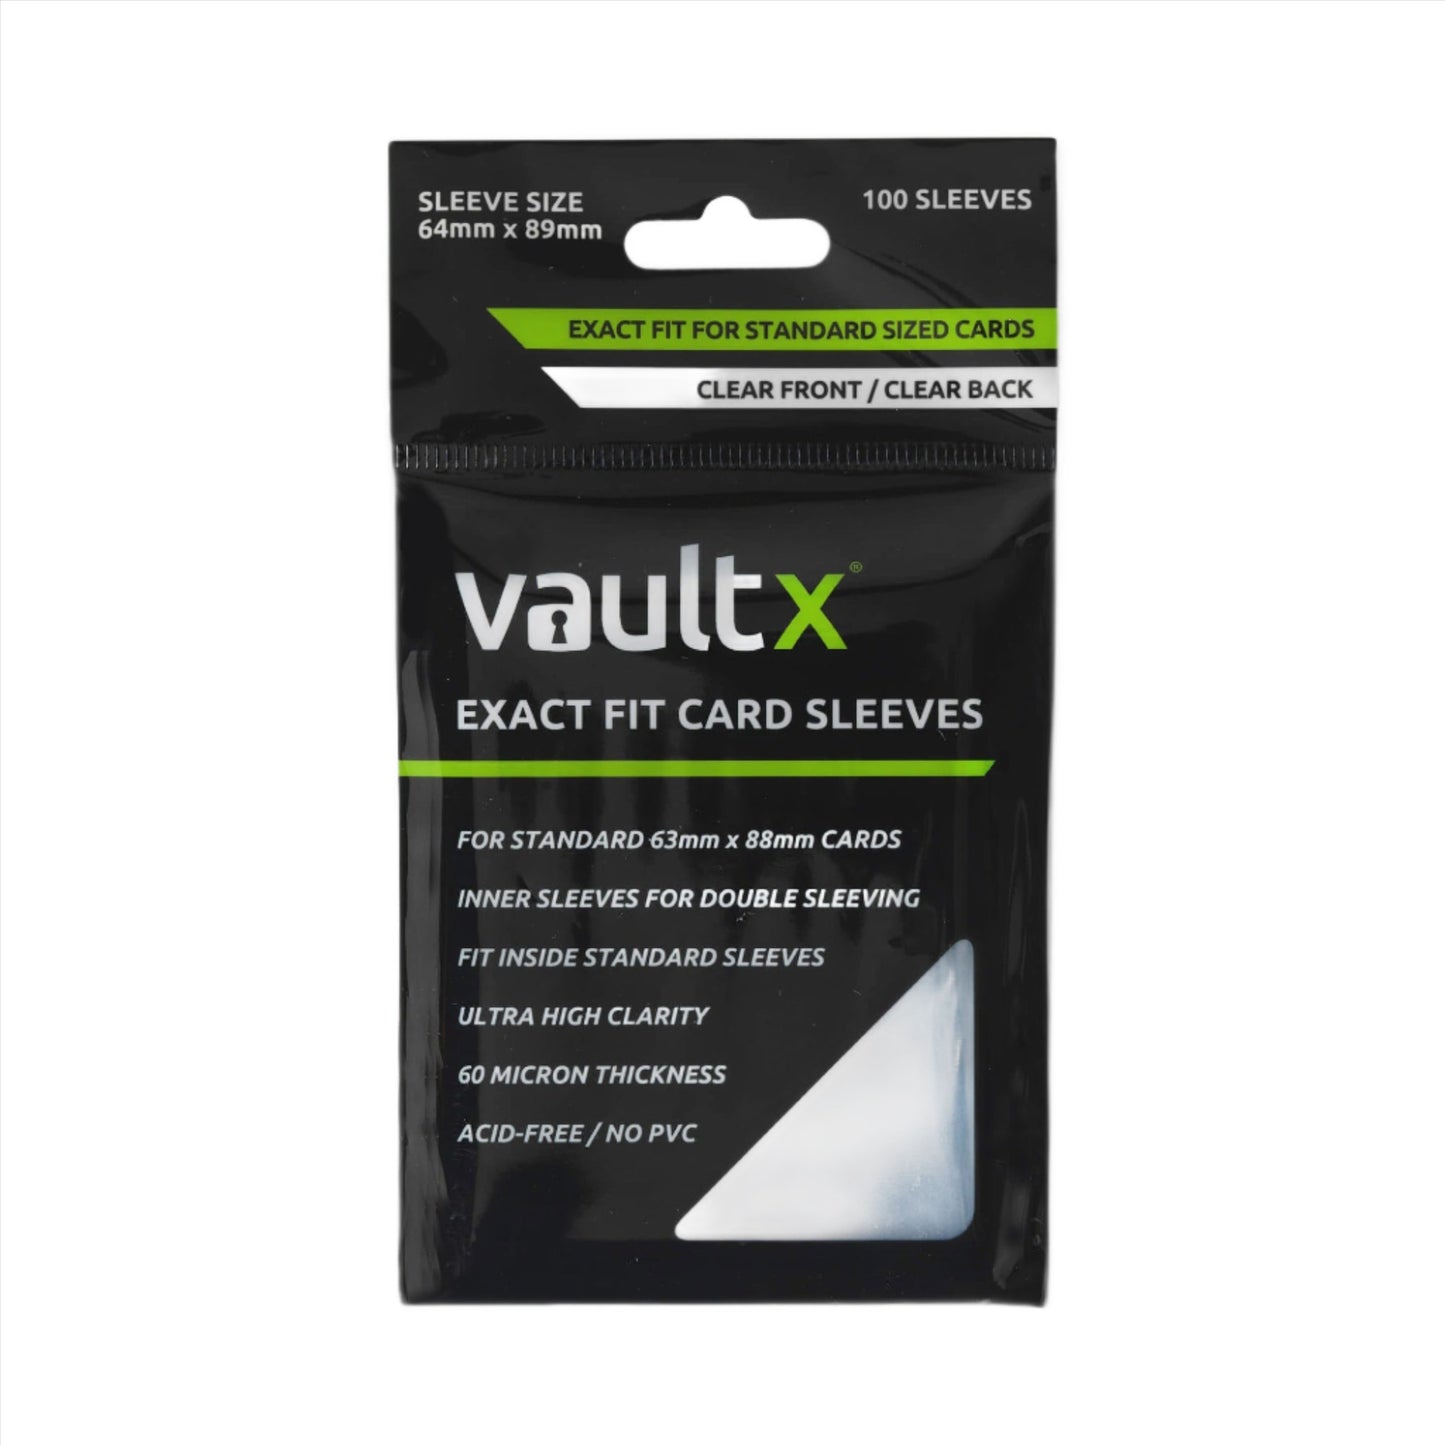 VAULT X - Exact Fit Card Sleeves (100)